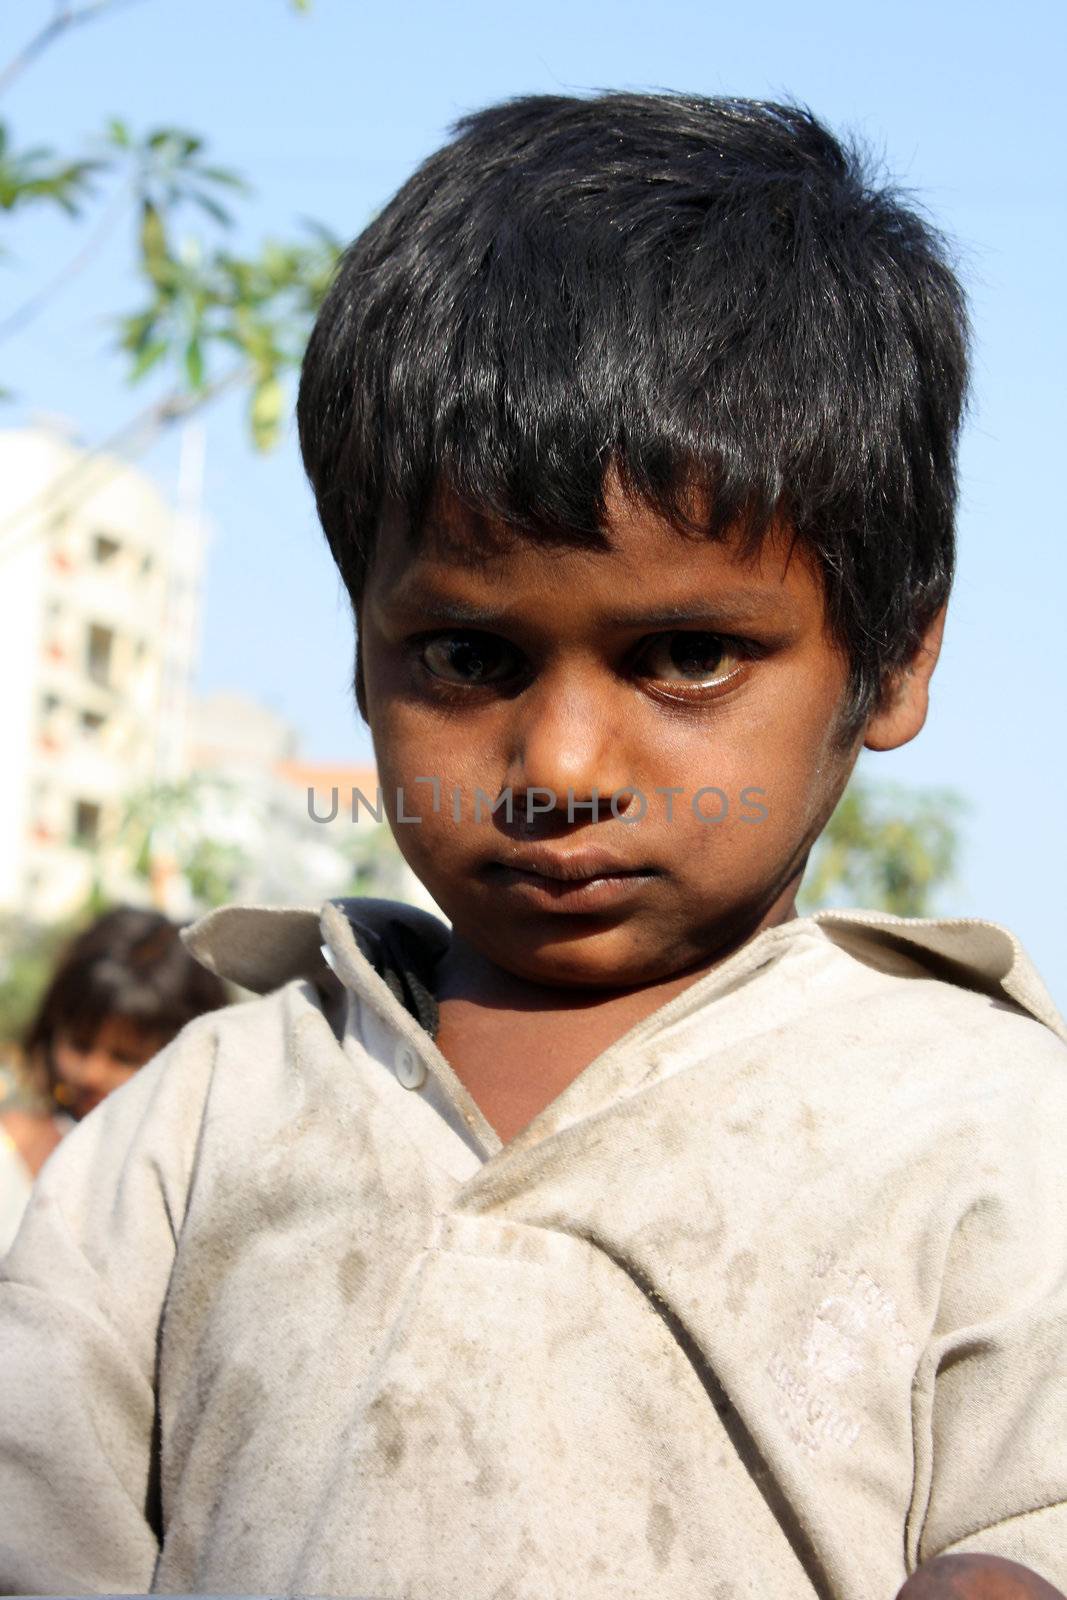 A portrait of a very poor kid from India with a shocked expression on his face.